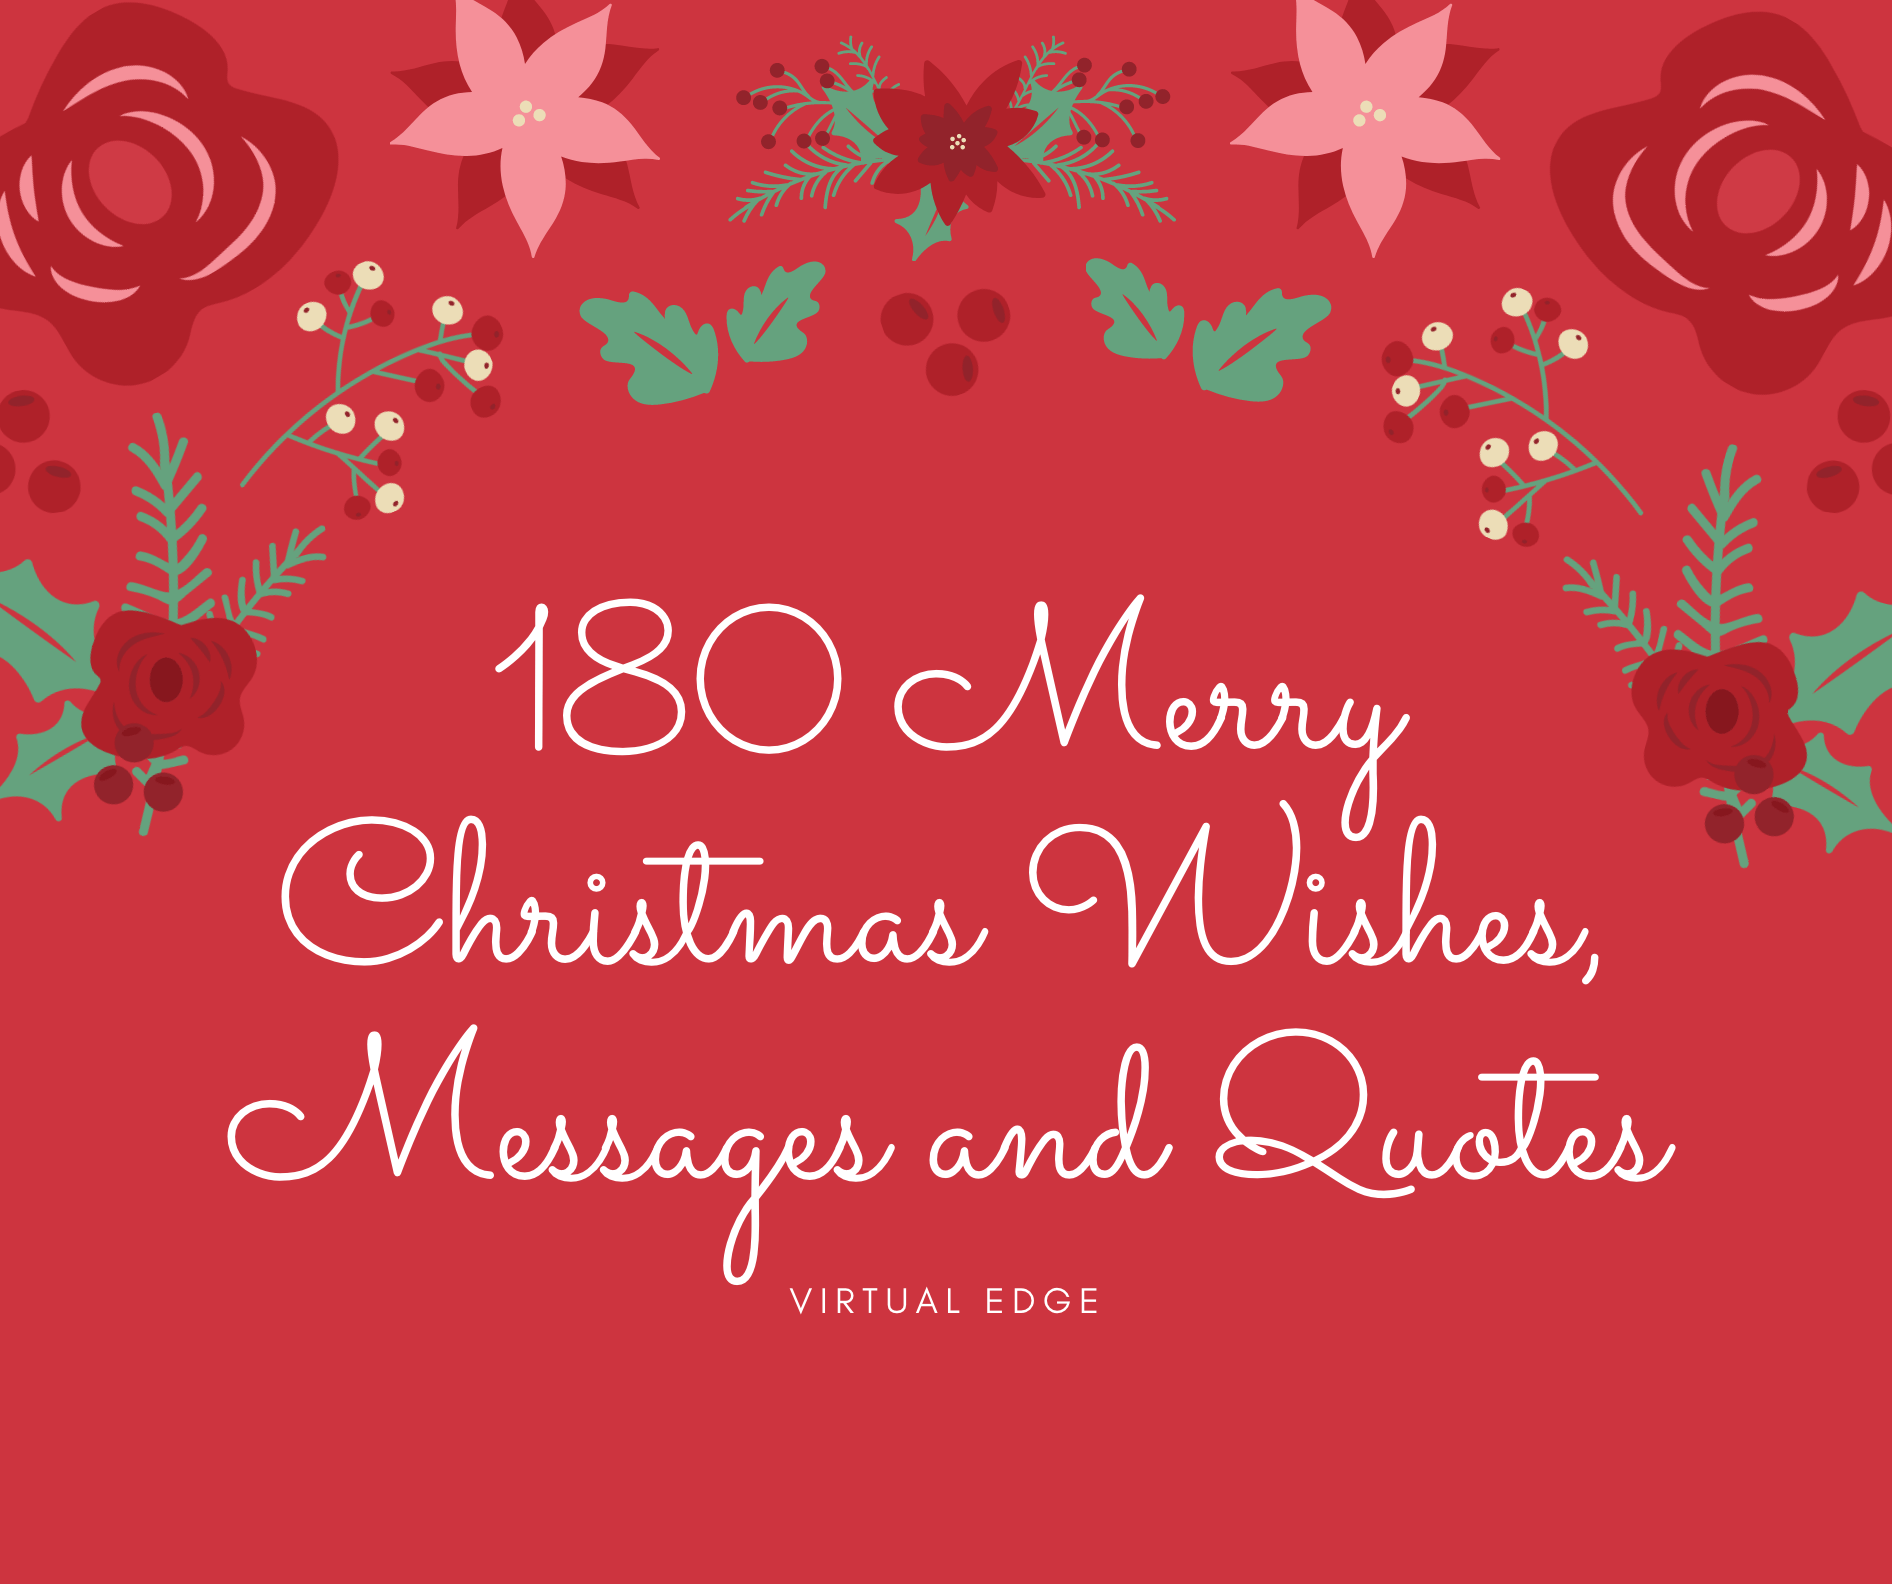 180 Merry Christmas Wishes, Messages and Quotes